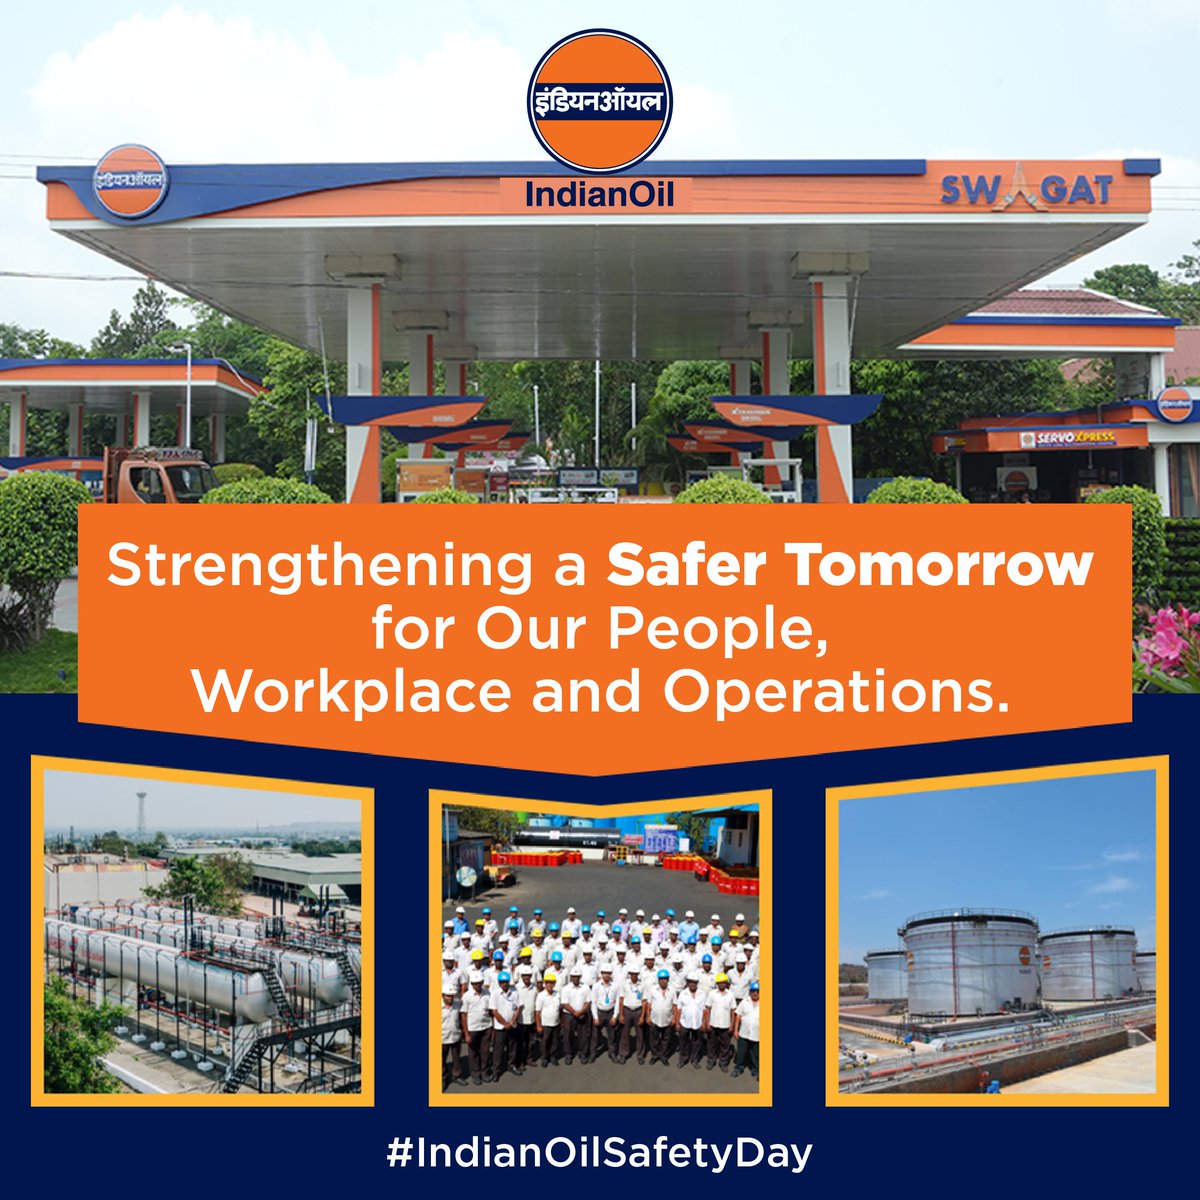 Reiterating our commitment to Safety My homage to the IOCians who lost their lives in the line of duty fighting the devastating fire at Jaipur Terminal in 2009. This incident will continue to serve as a reminder to restate our dedication to implementing a 100% safe and secure…